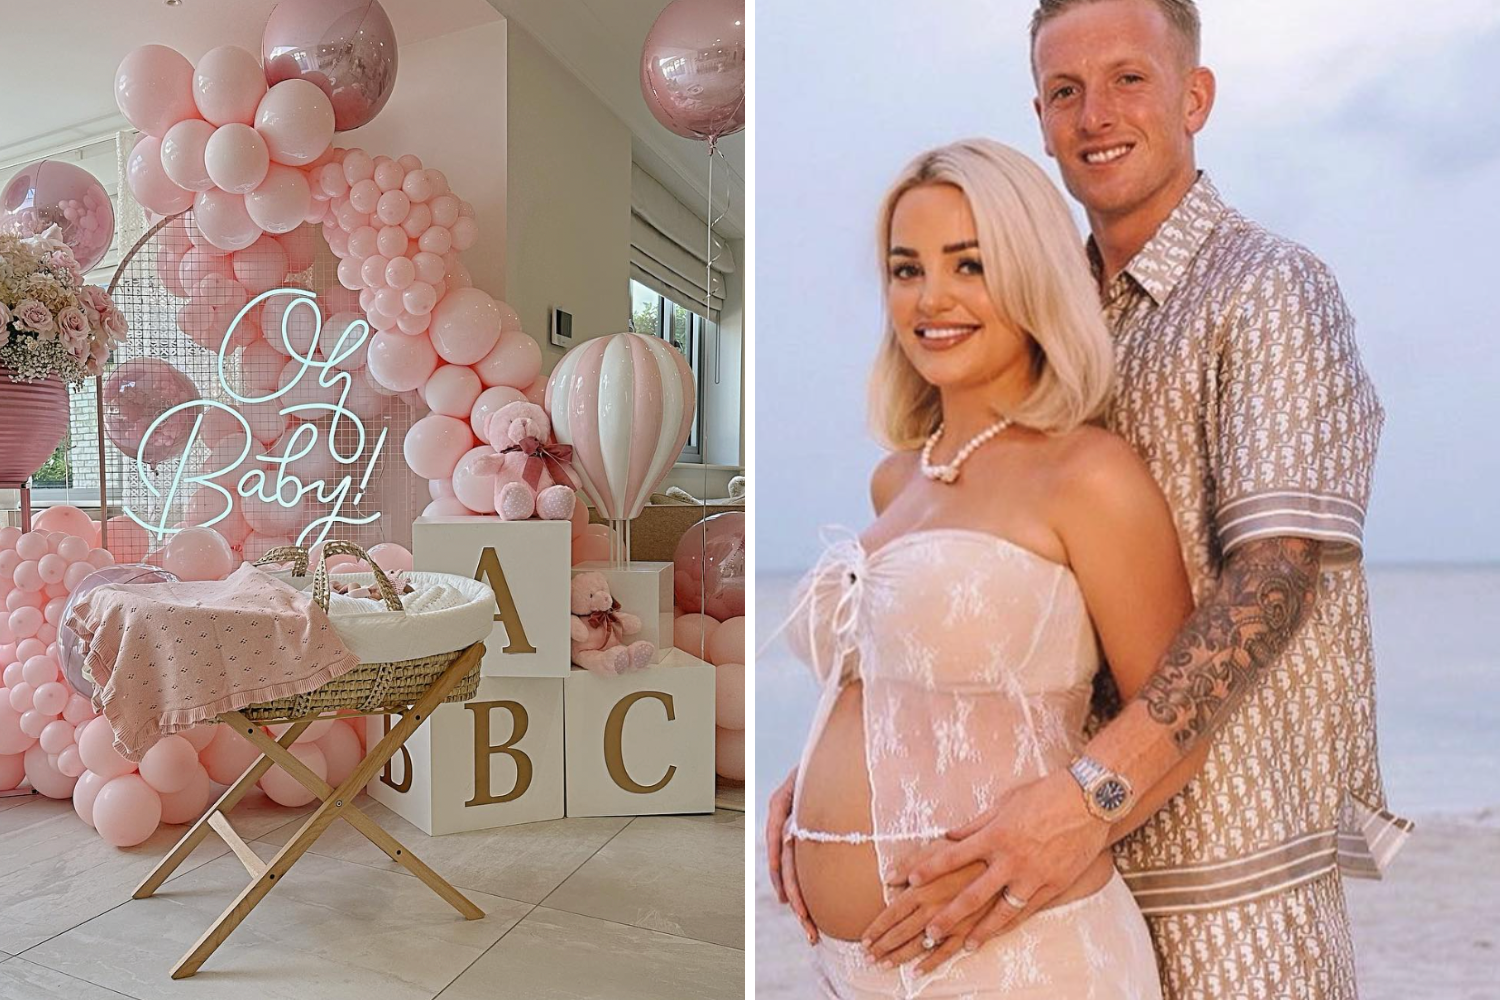 England goalie Jordan Pickford and wife Megan announce birth of second baby 